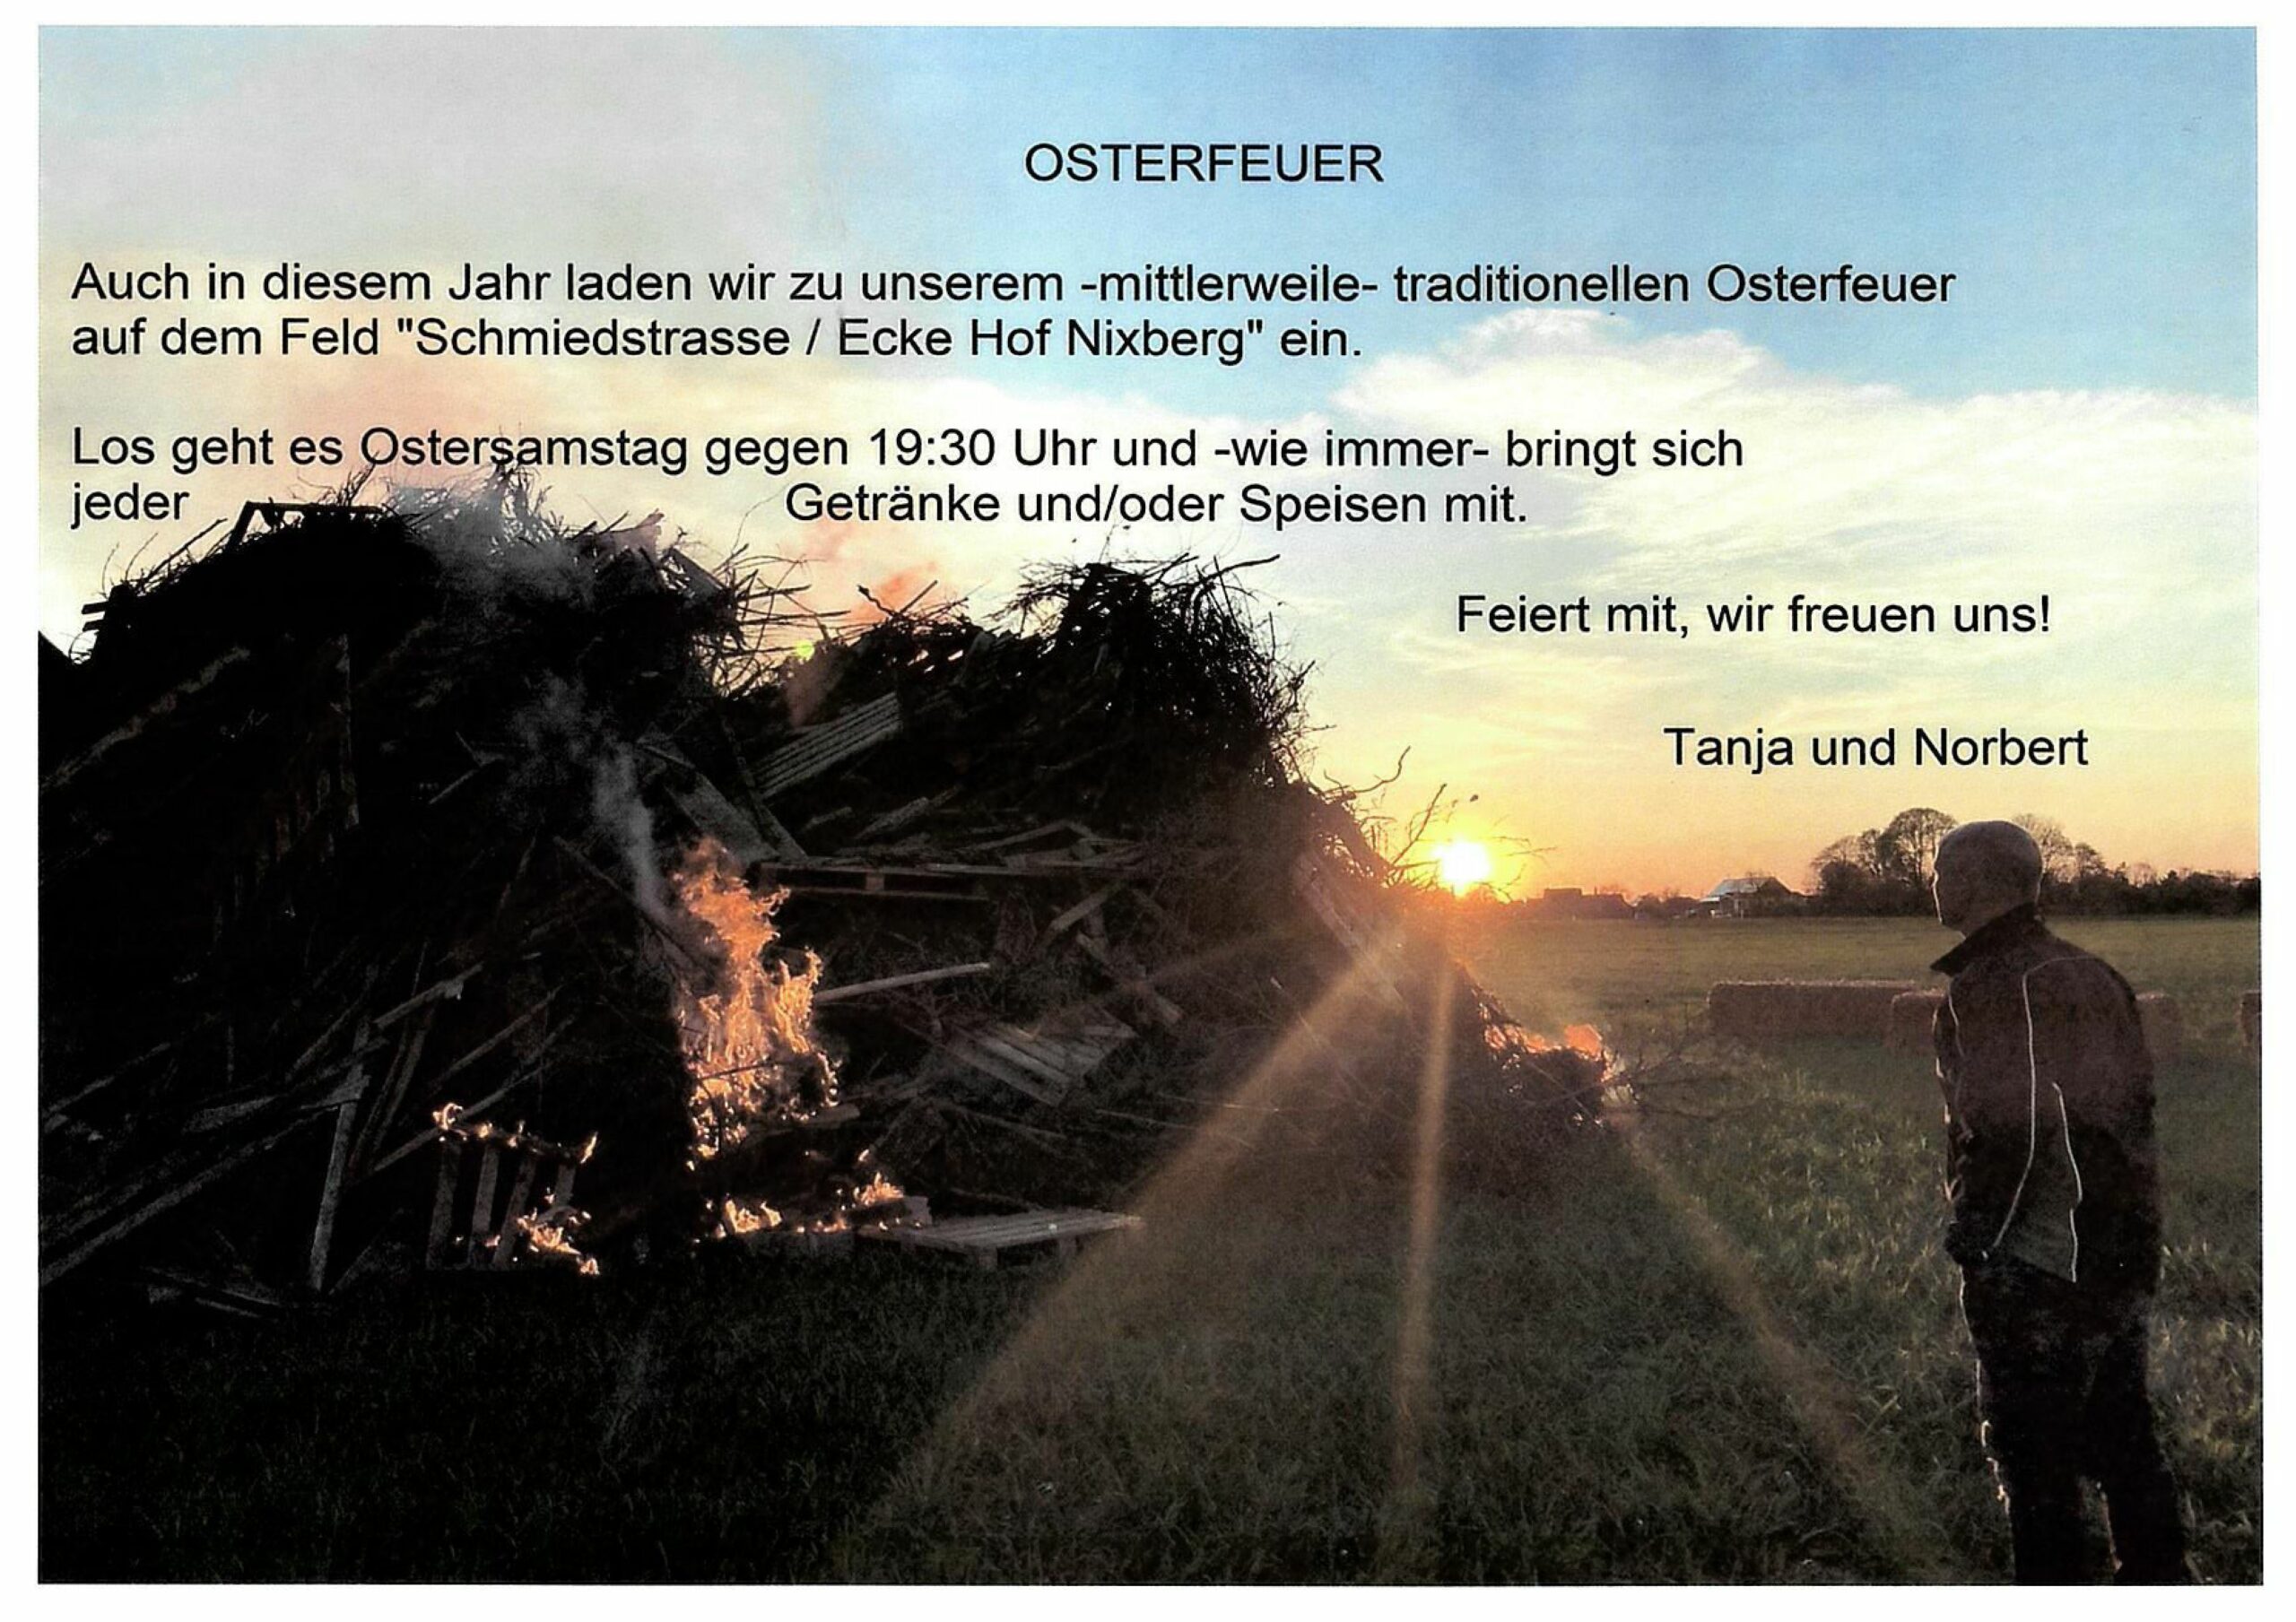 Großes Osterfeuer am Ostersamstag, 08.04.2023.